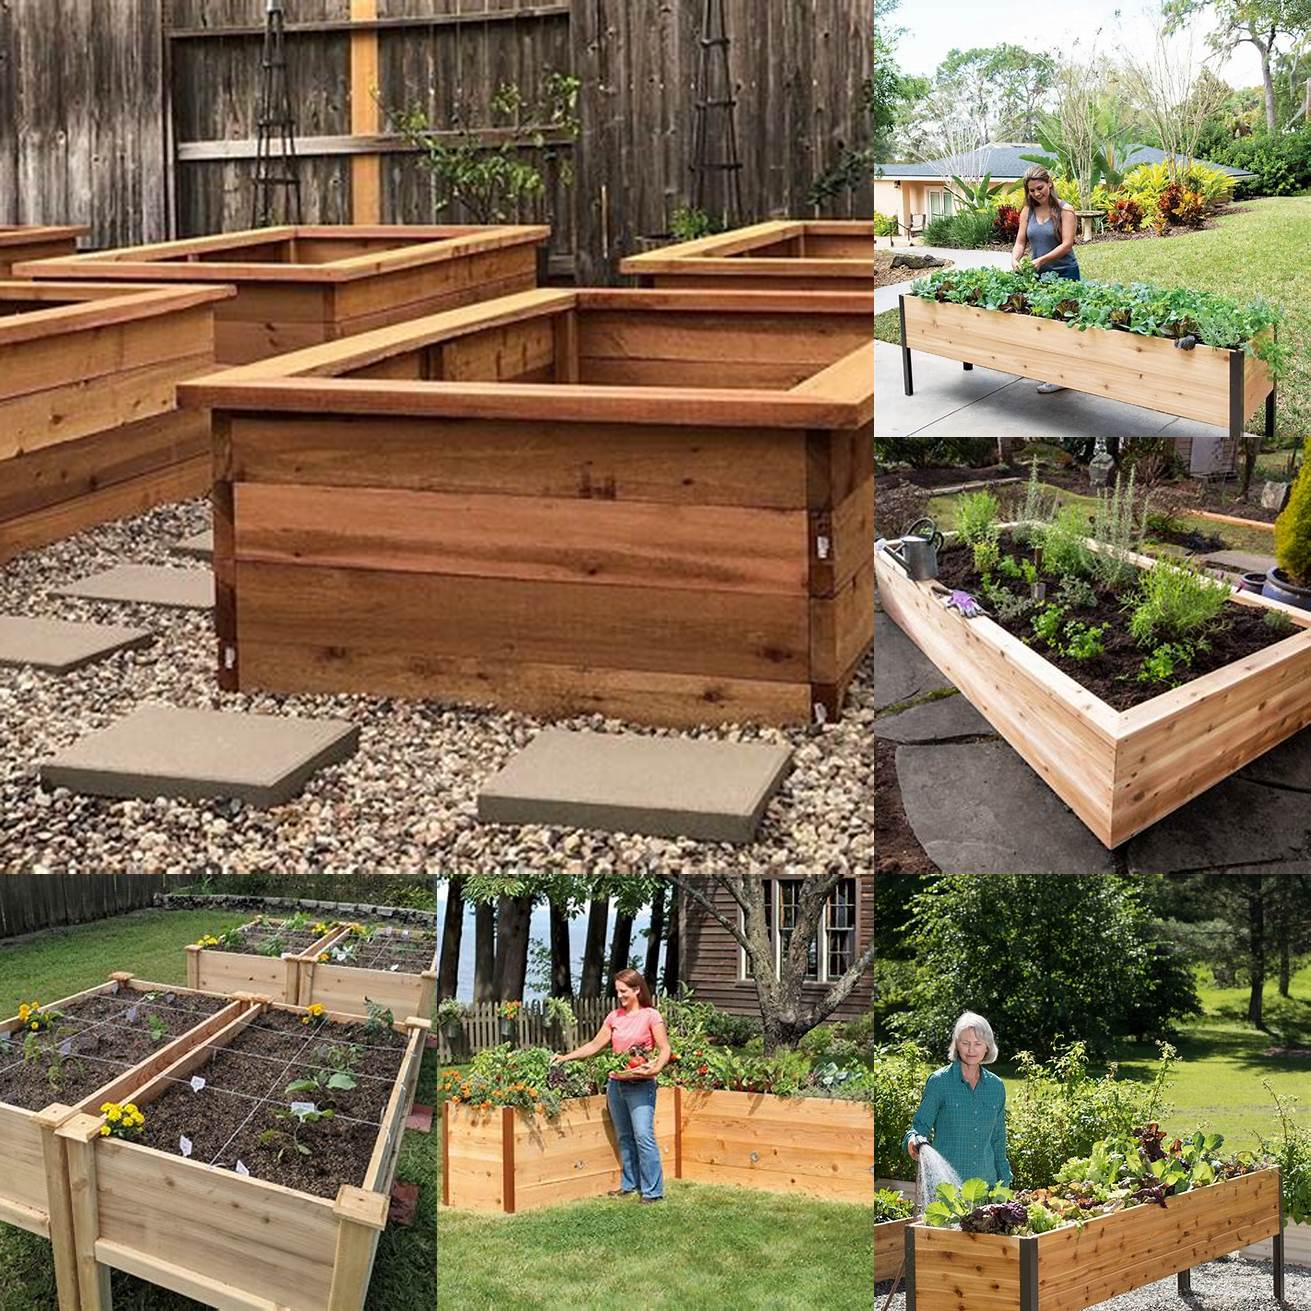 Improved Drainage Cedar Raised Garden Beds are elevated meaning water drains away from the soil more efficiently